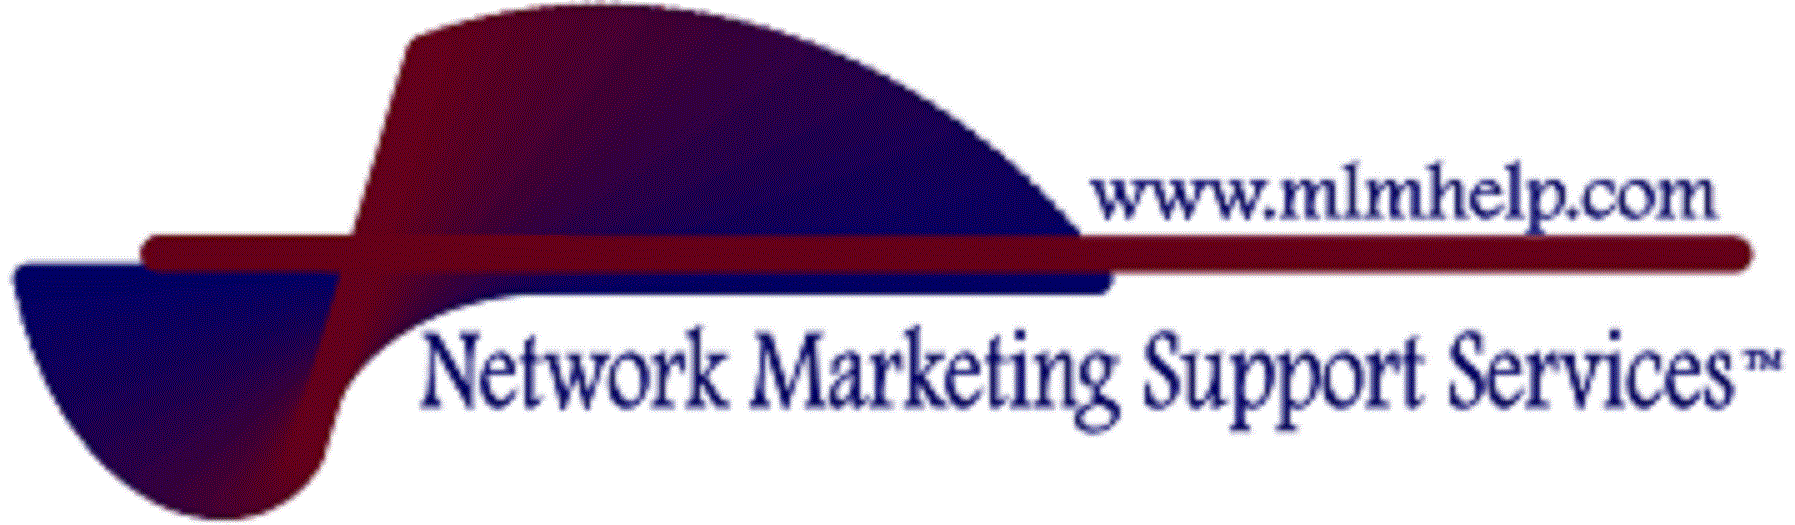 Network Marketing Support Services by Dale Calvert